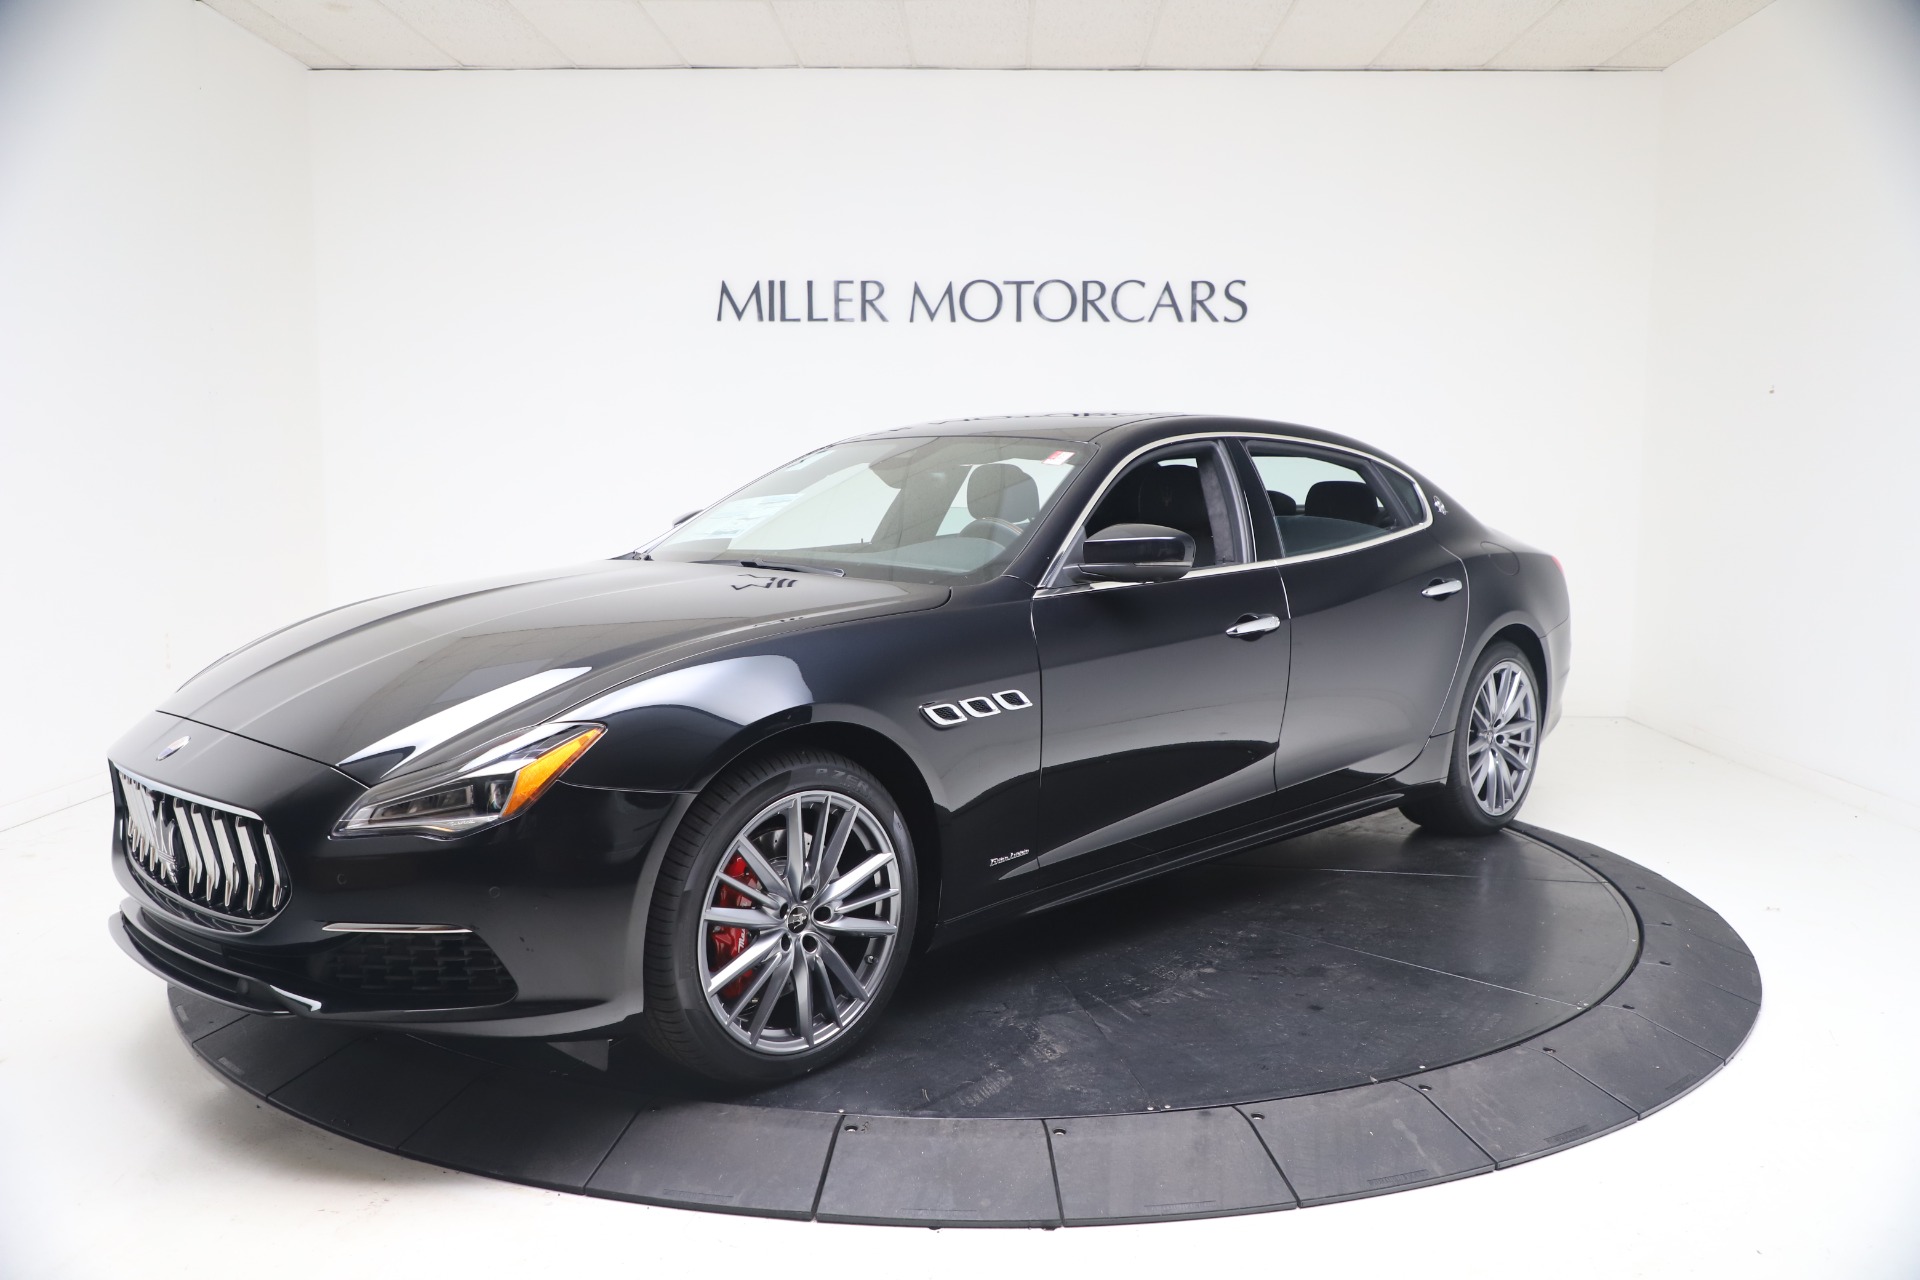 New 2021 Maserati Quattroporte S Q4 GranLusso for sale Sold at Rolls-Royce Motor Cars Greenwich in Greenwich CT 06830 1